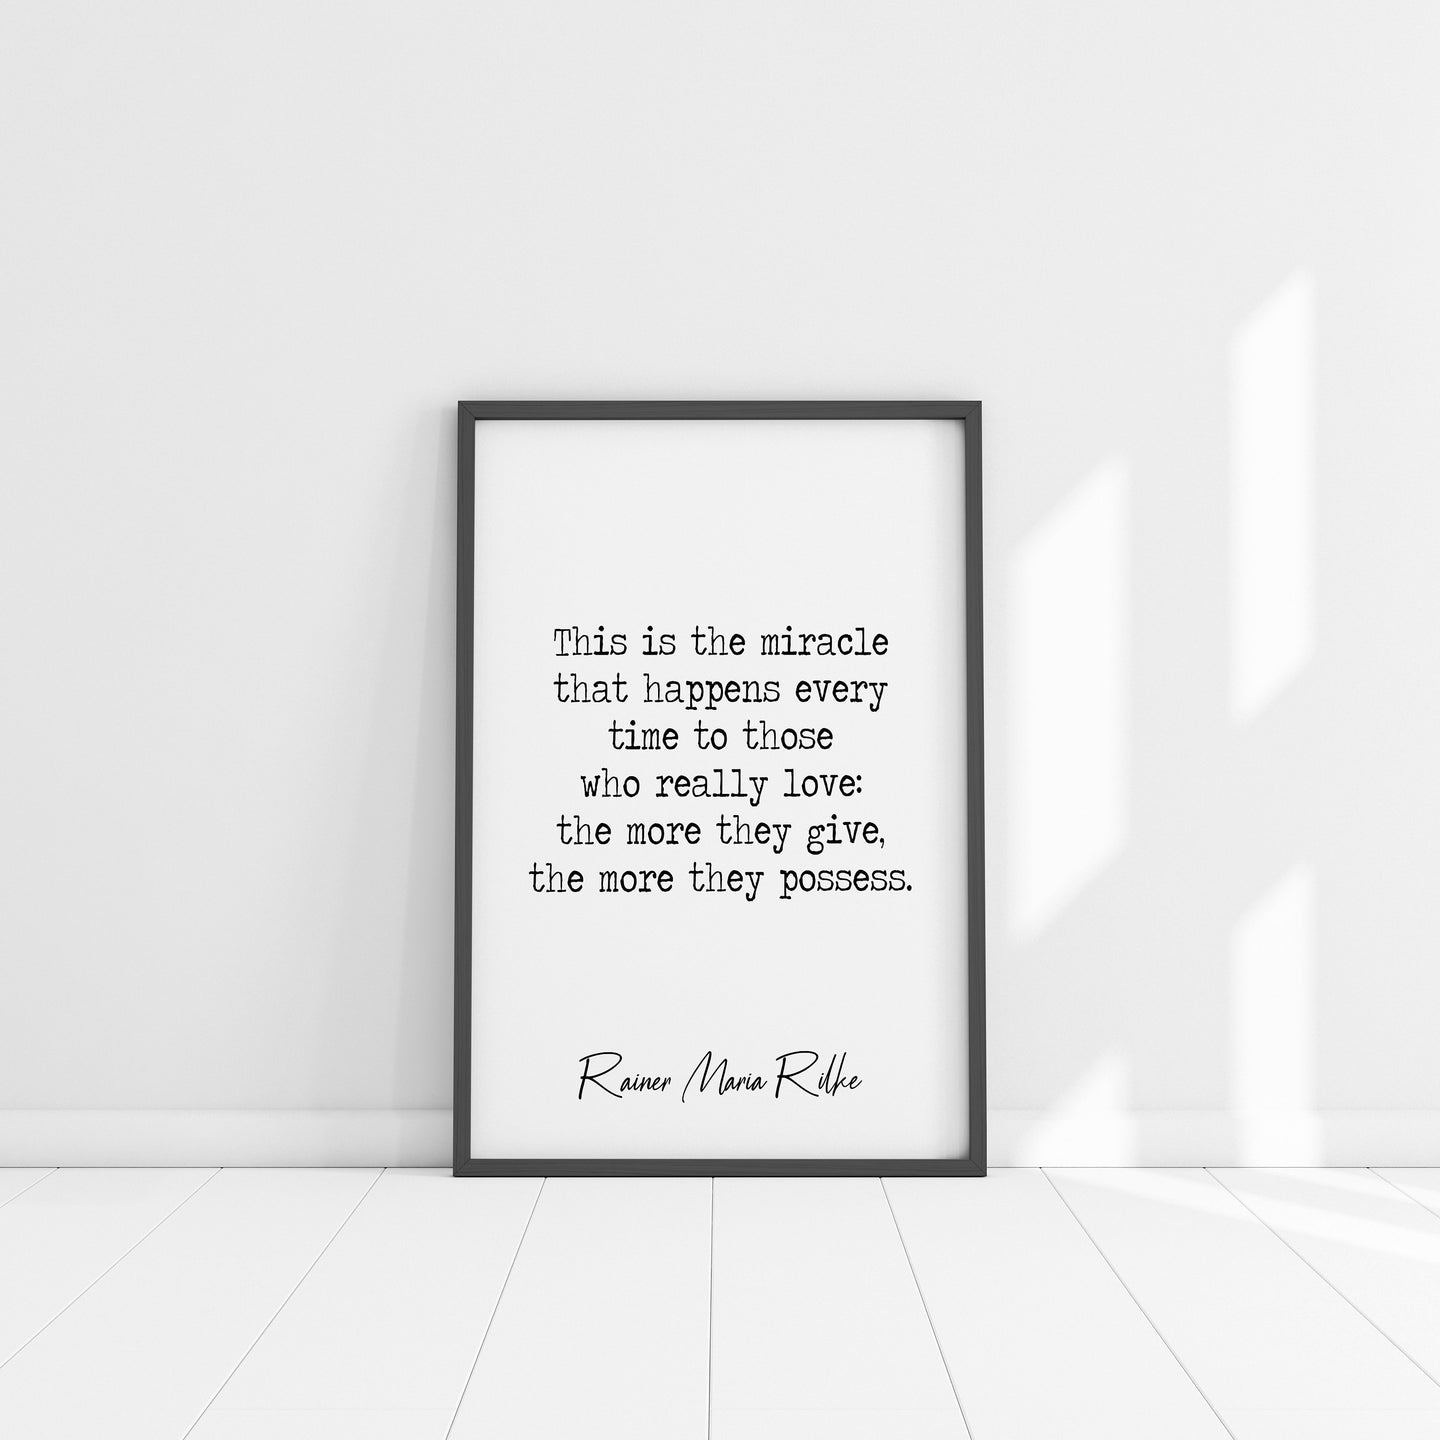 Rainer Maria Rilke - Miracle quote - The more they give, the more they possess Art Print Home office Decor poetry wall art UNFRAMED